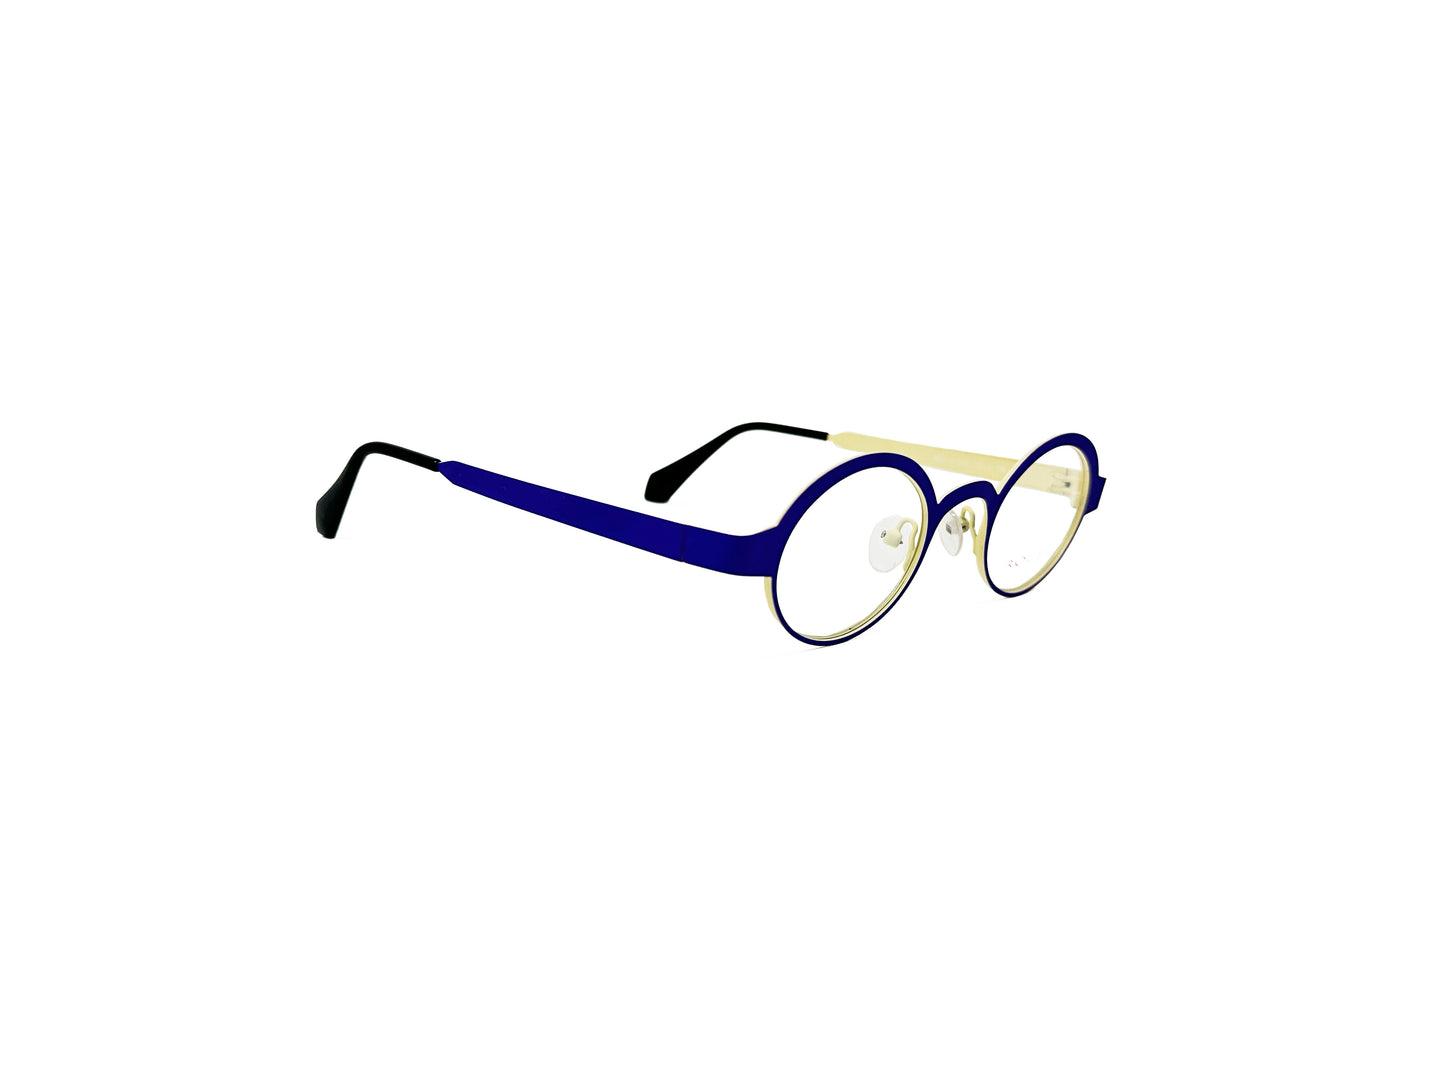 Roger oval, metal optical frame. Model: Dee. Color: 6 - Blue with cream insides. Front view.